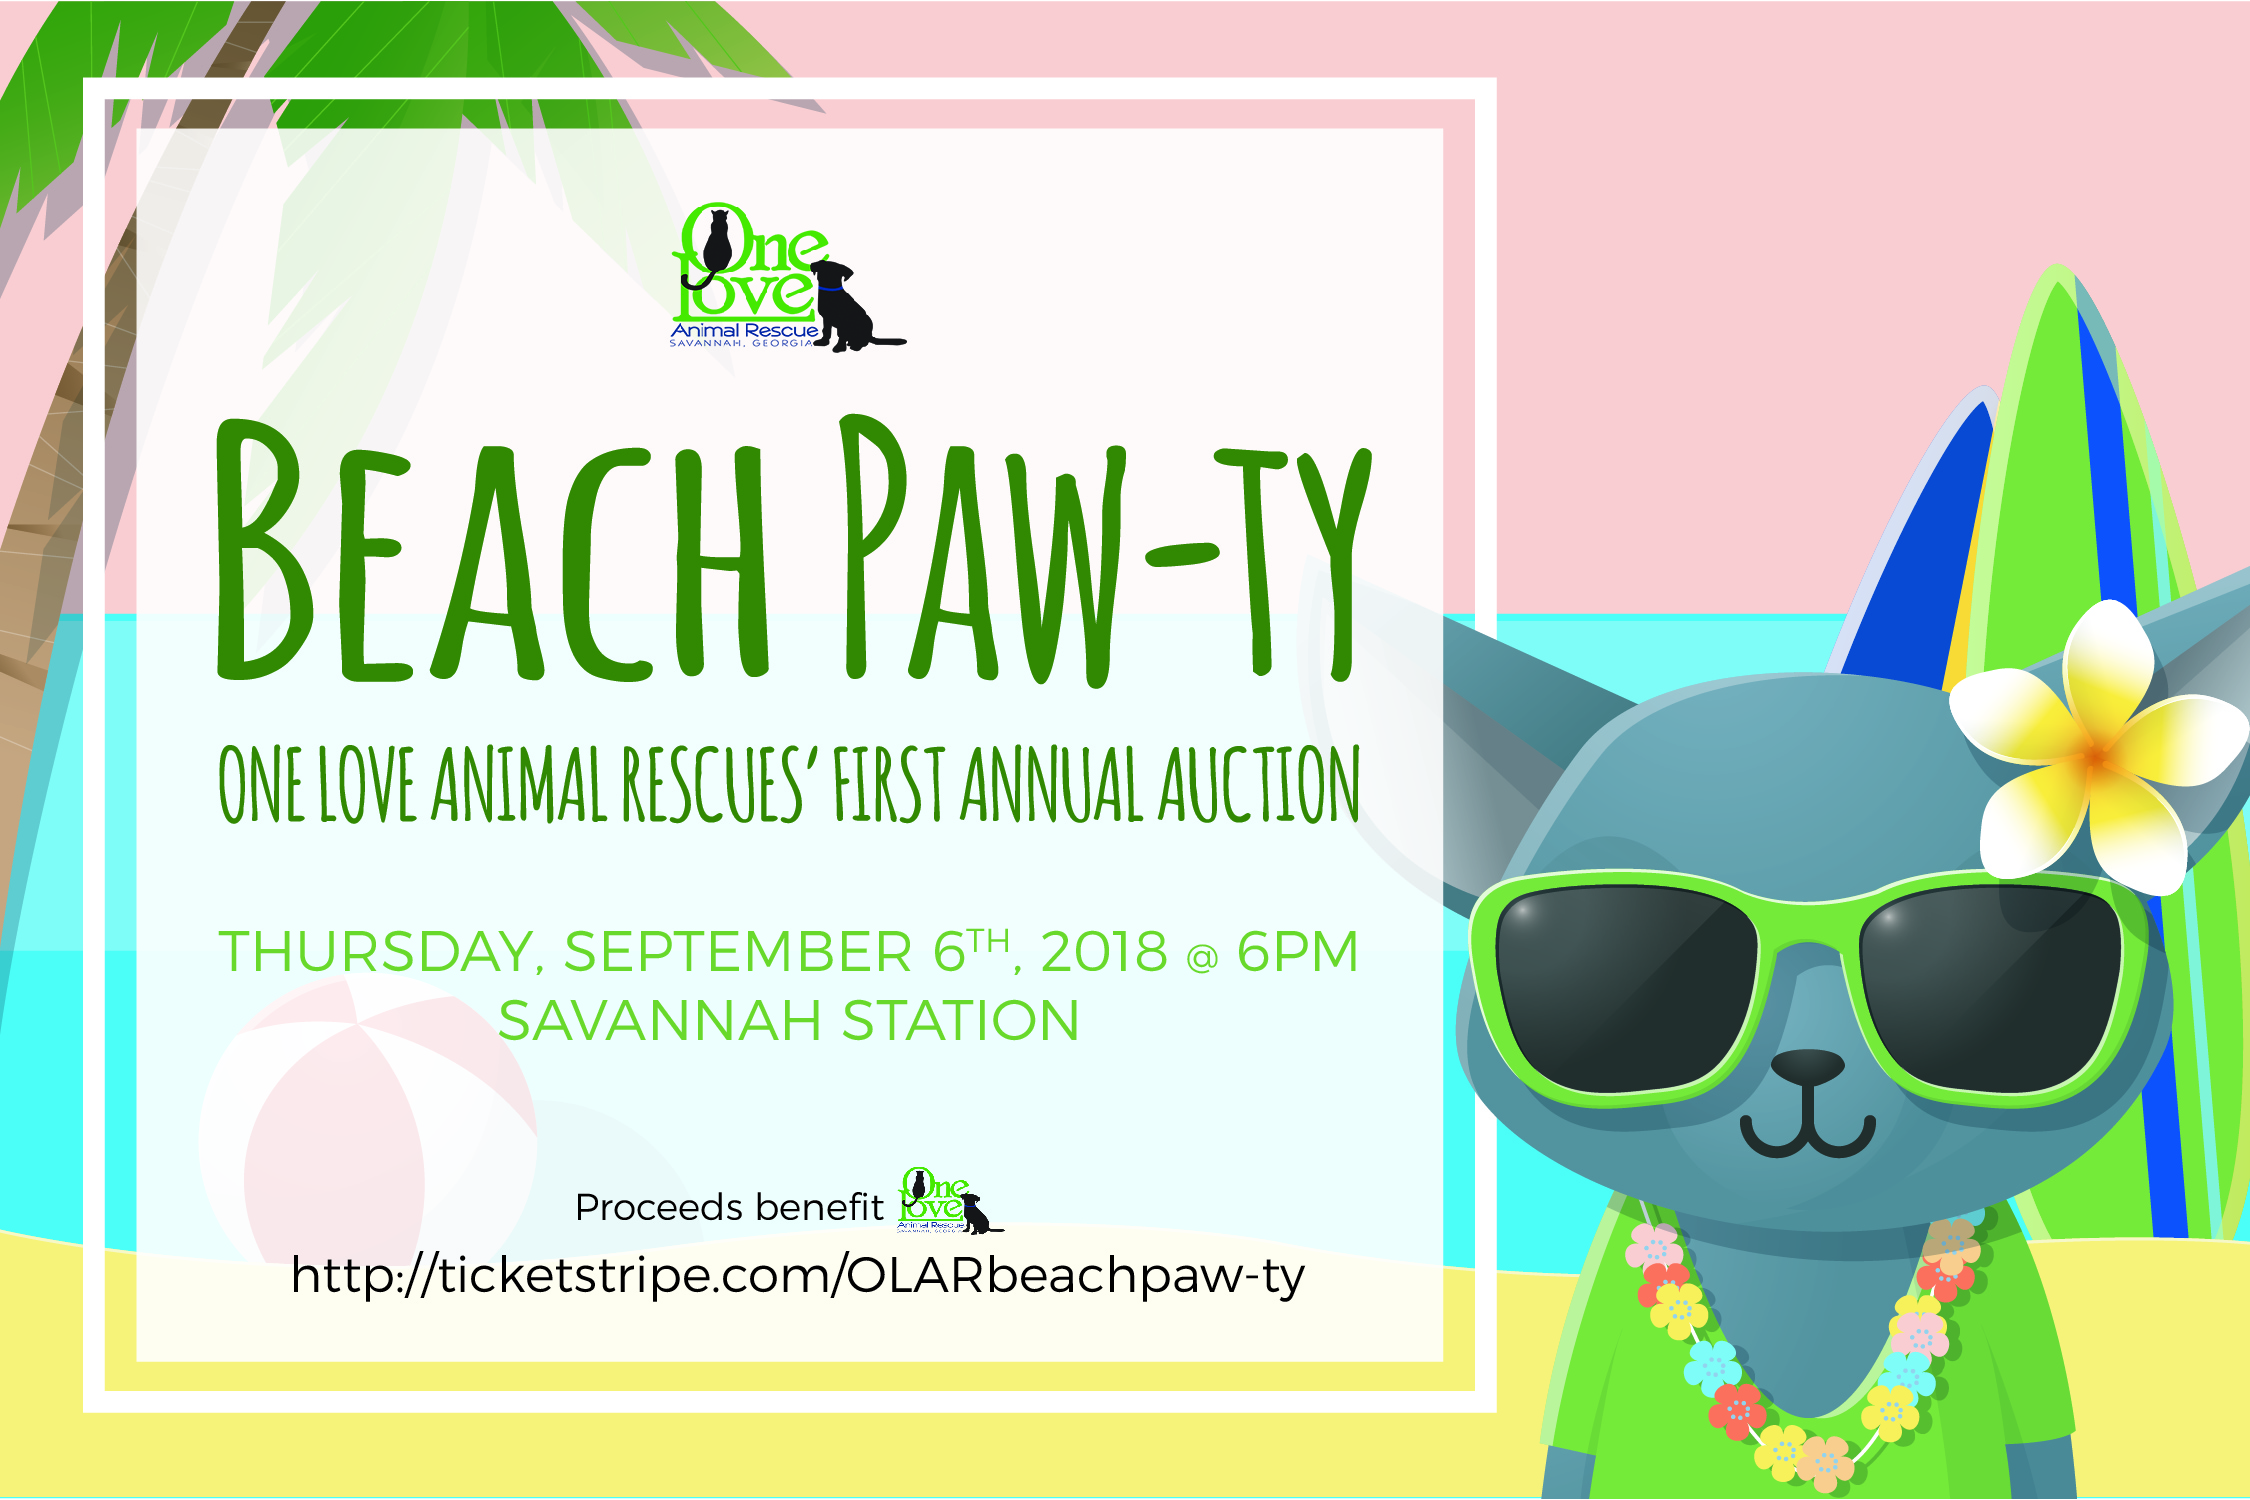 Beach Paw-ty, One Love Animal Rescue's first annual auction